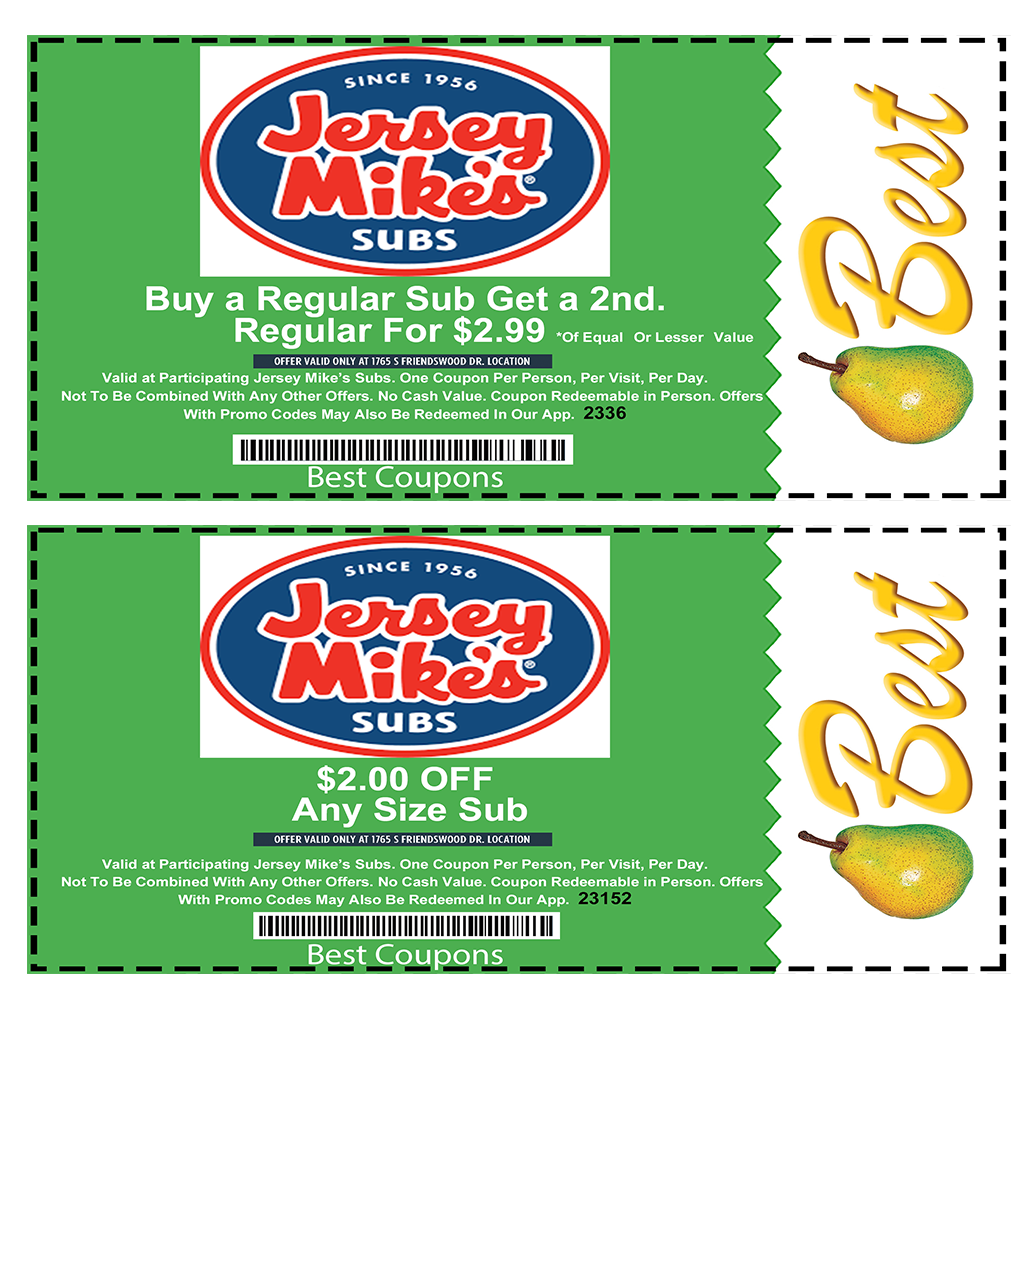 Jersey Mike’s Subs Friendswood Best Coupons Magazine